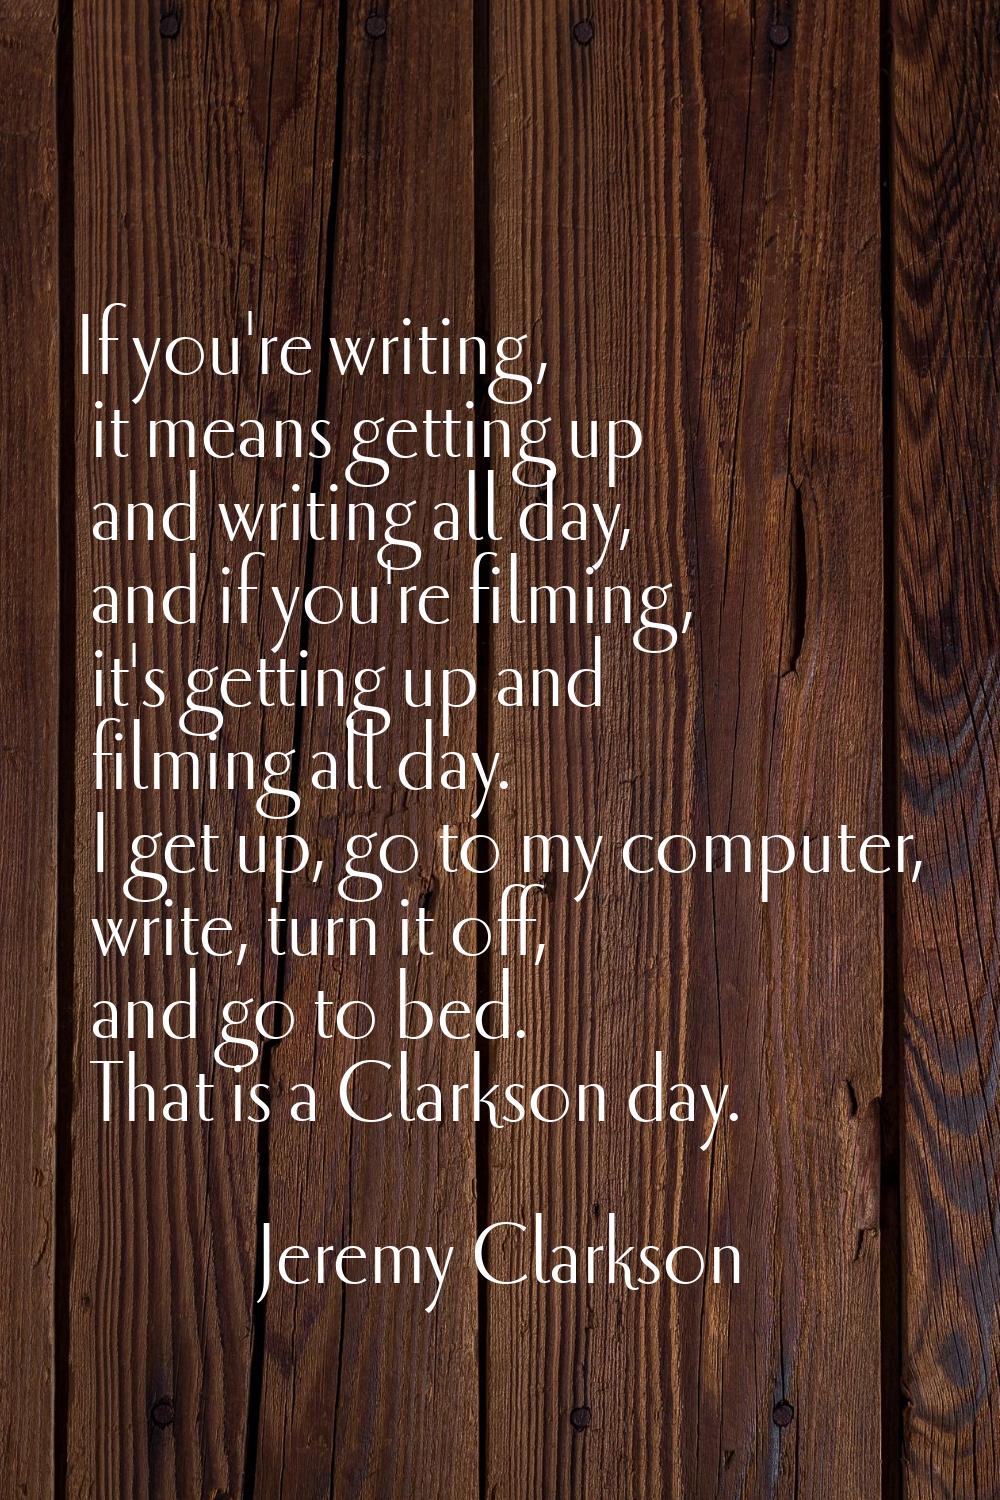 If you're writing, it means getting up and writing all day, and if you're filming, it's getting up 